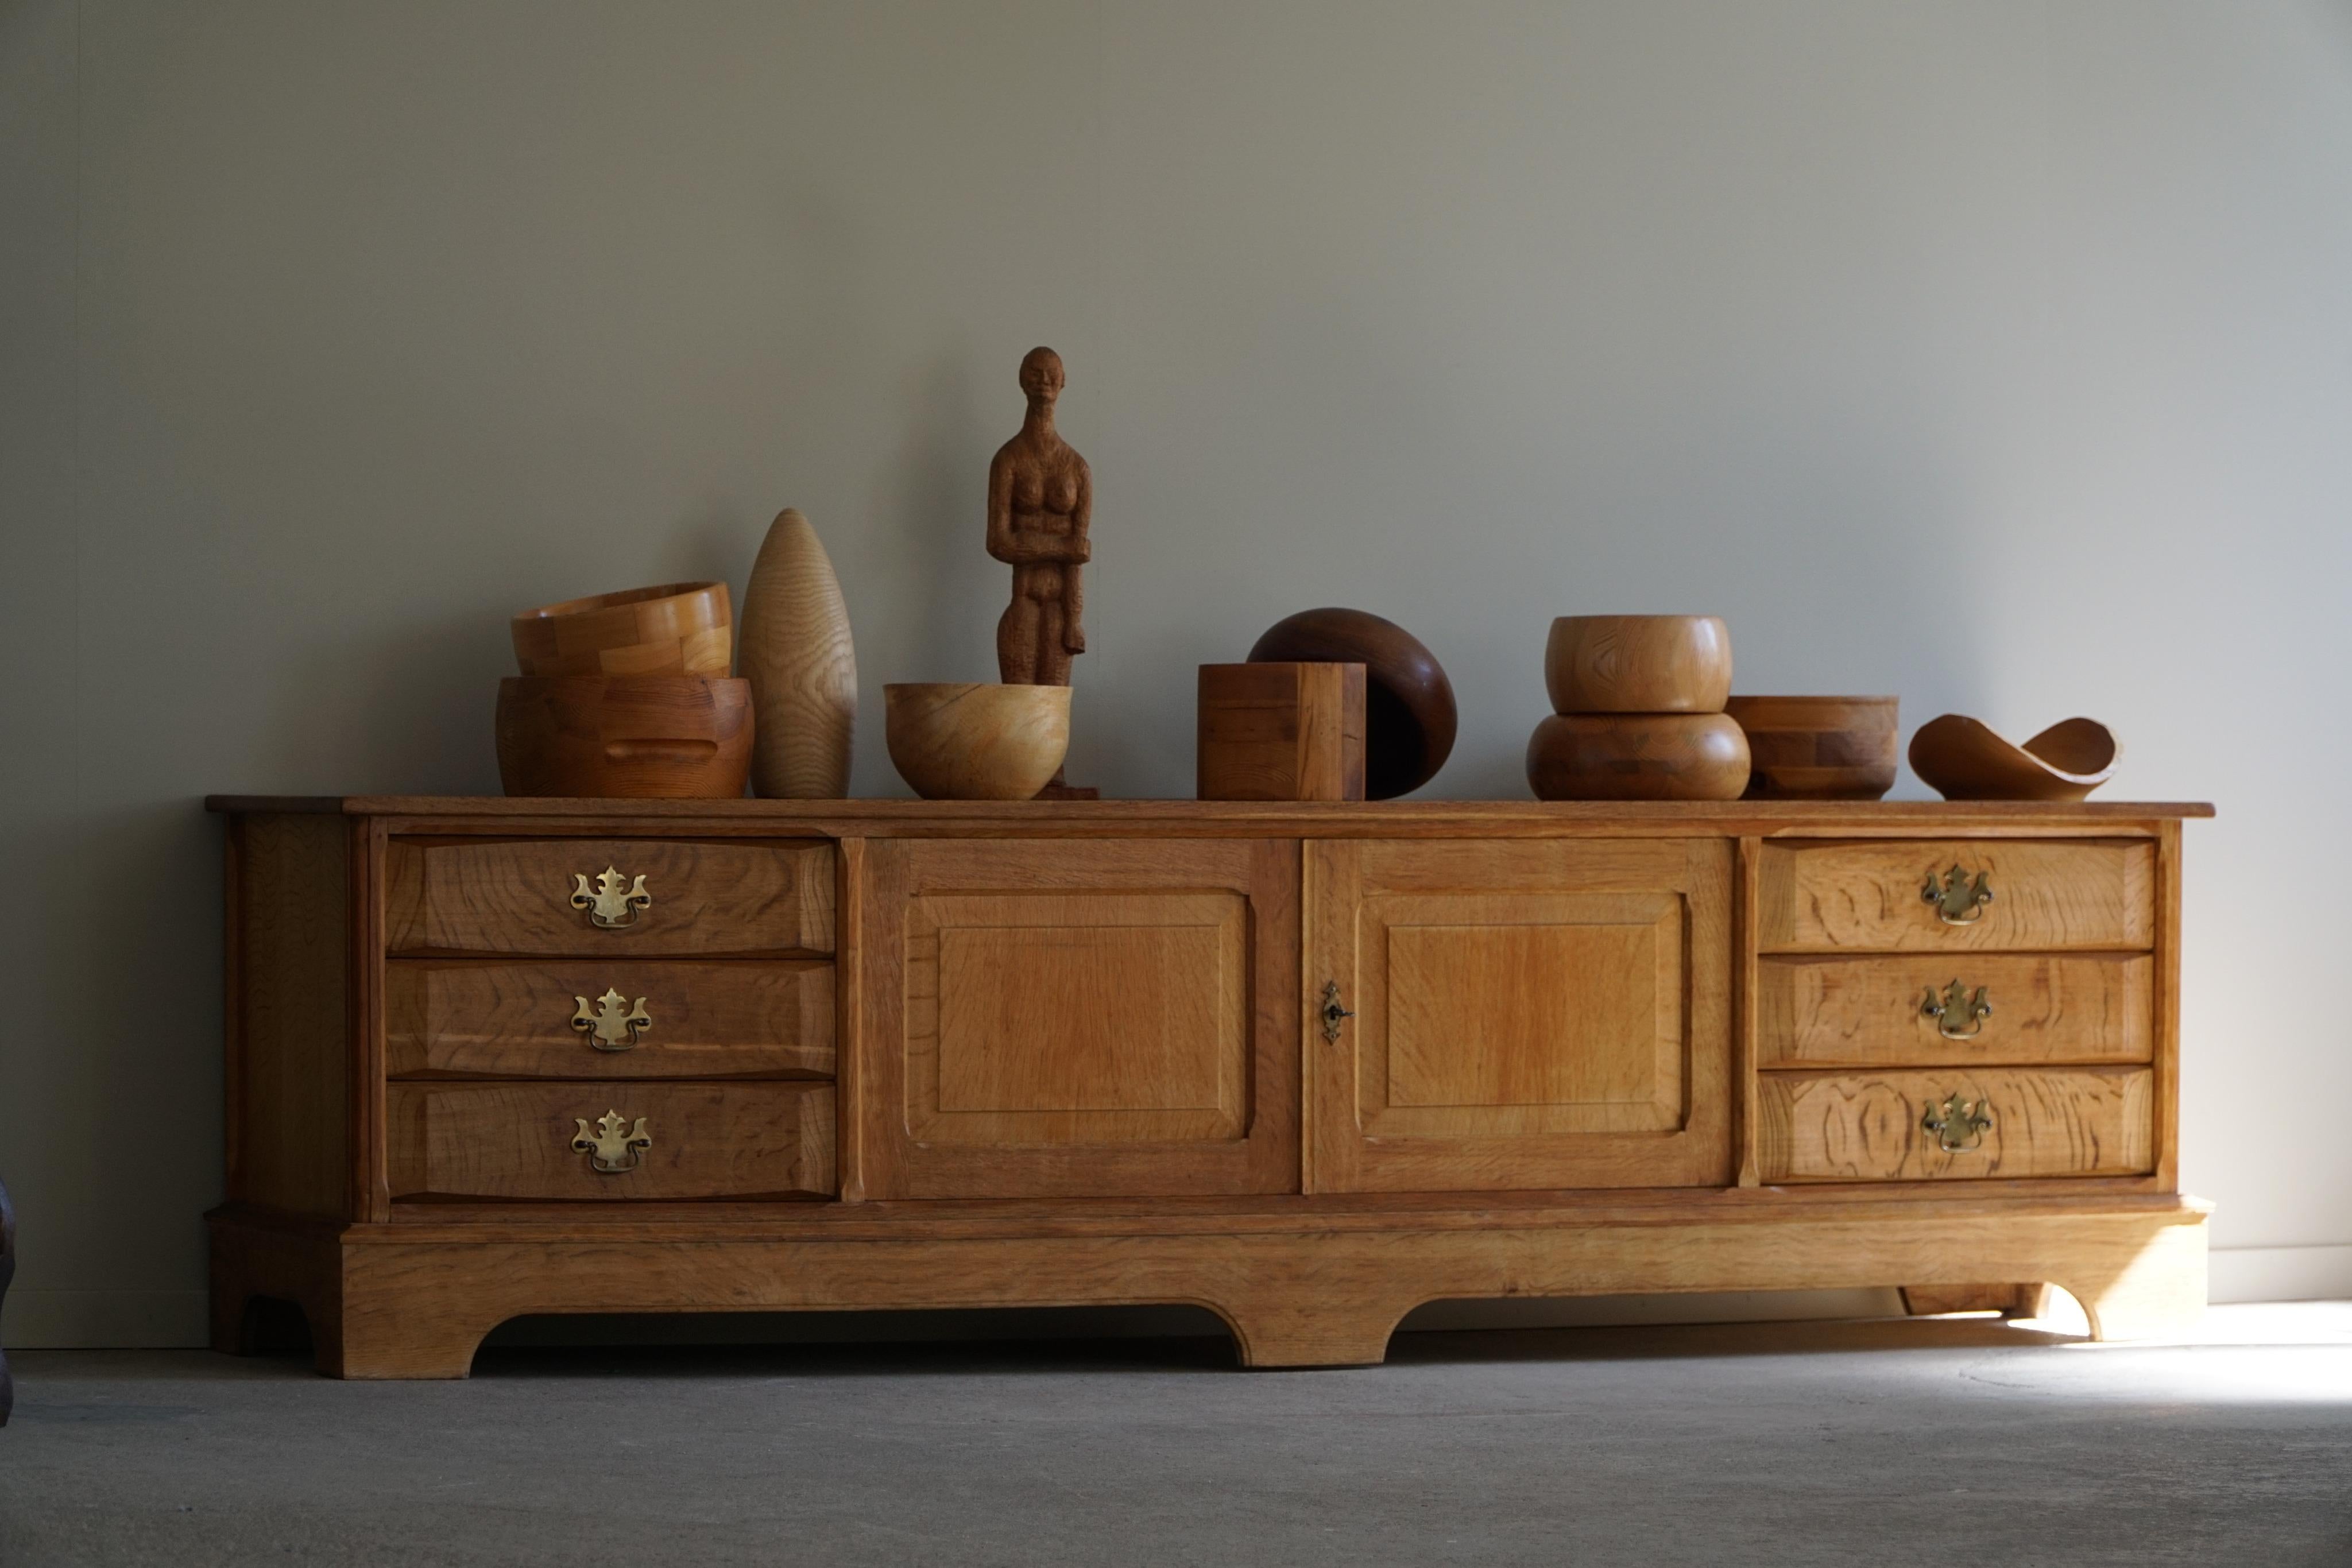 Introducing a timeless low sideboard crafted by a Danish cabinetmaker in the mid-century era of the 1960s. This elegant and functional piece embodies the Scandinavian design principles of simplicity, functionality, and natural materials, making it